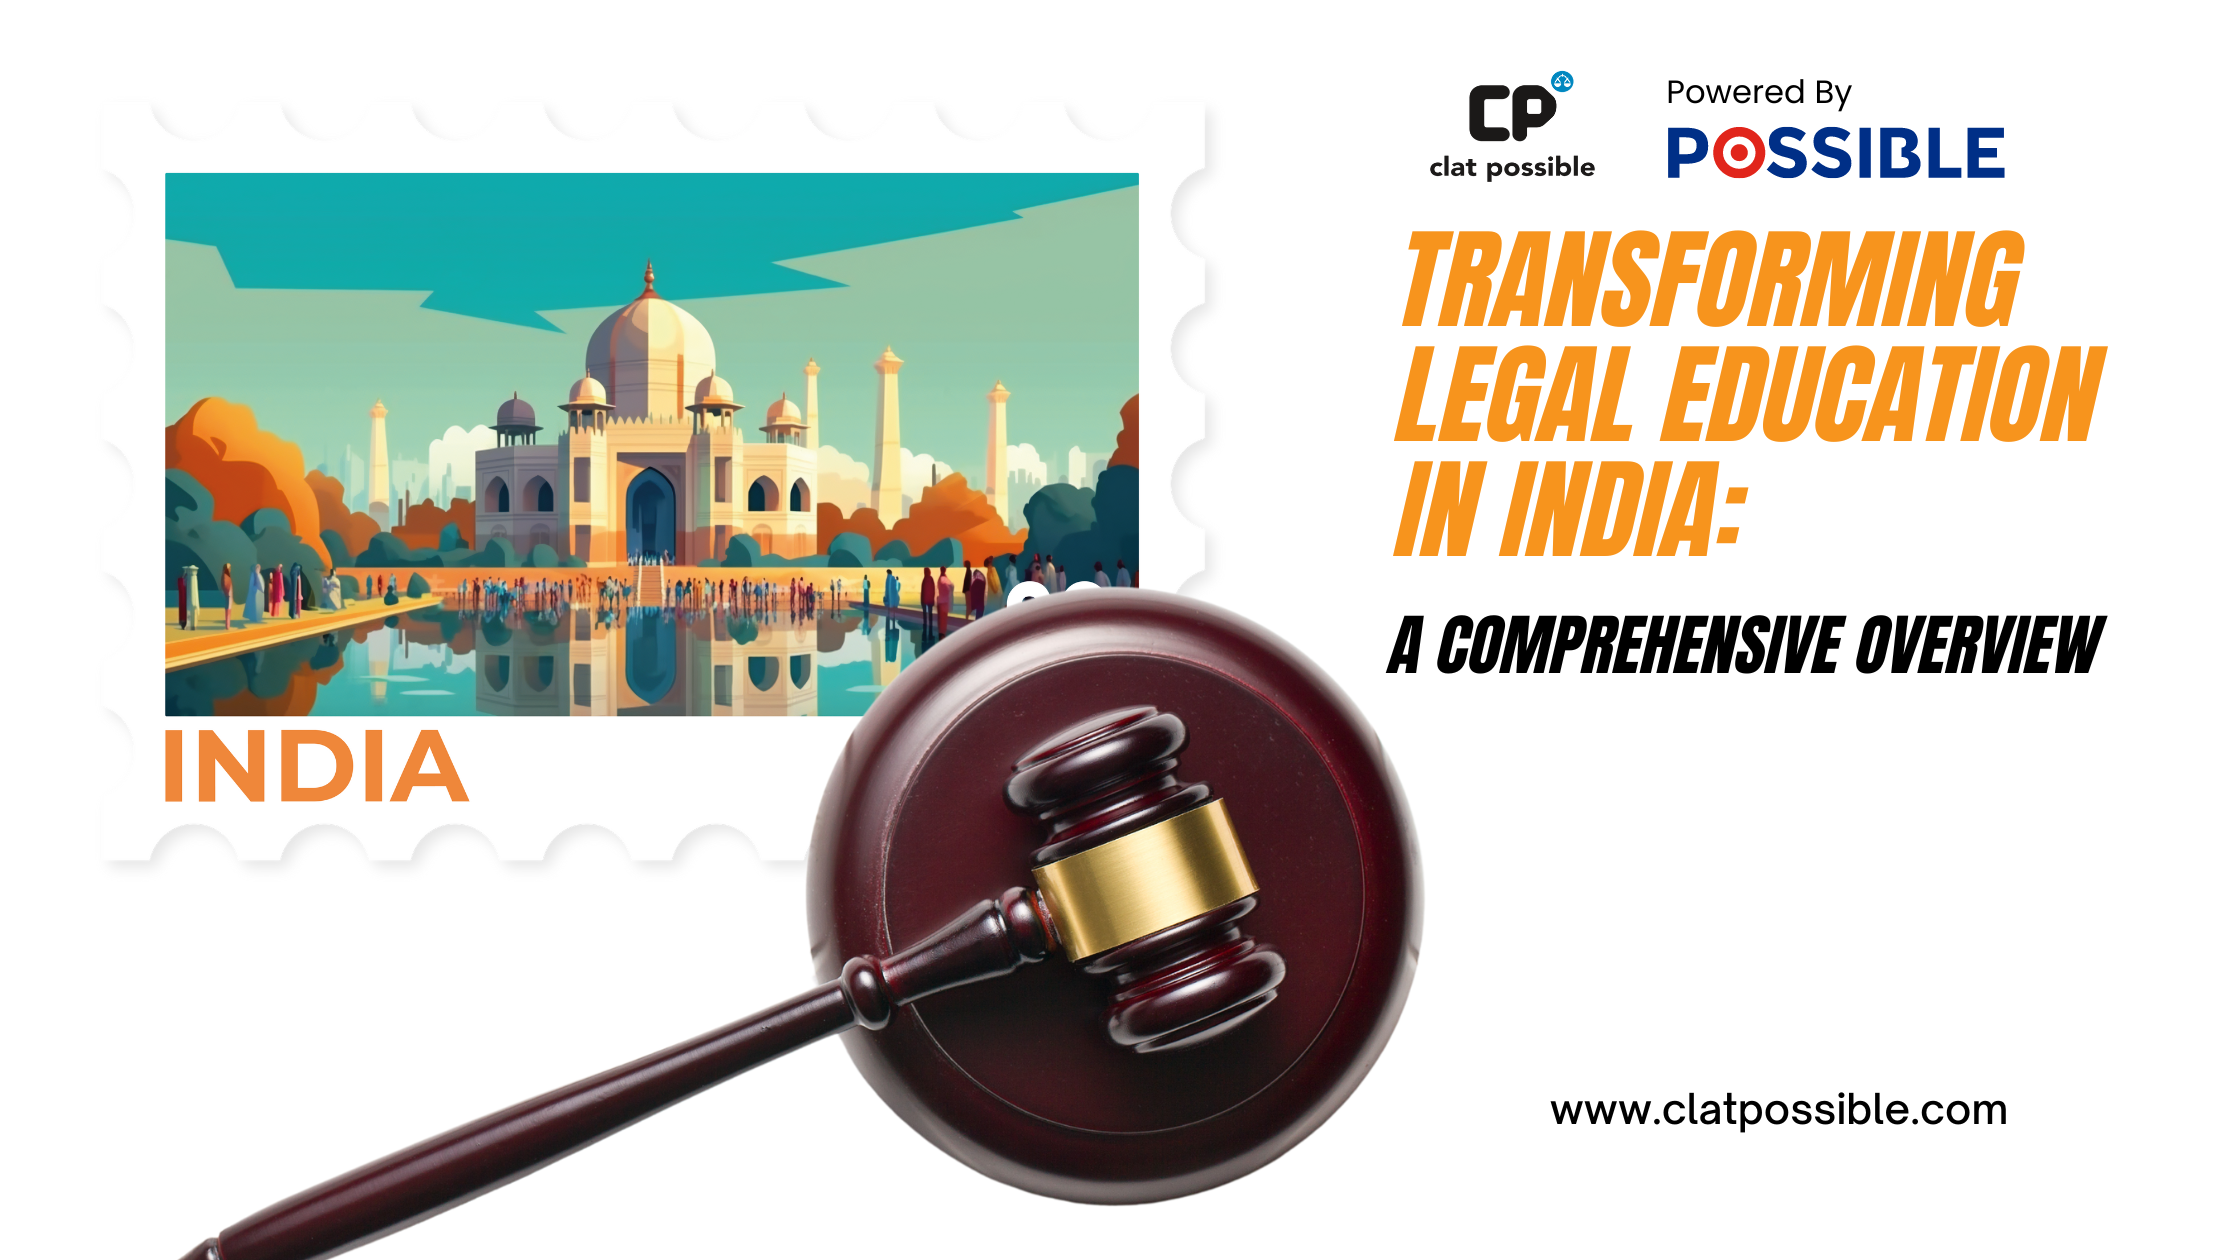 Transforming Legal Education in India: A Comprehensive Overview